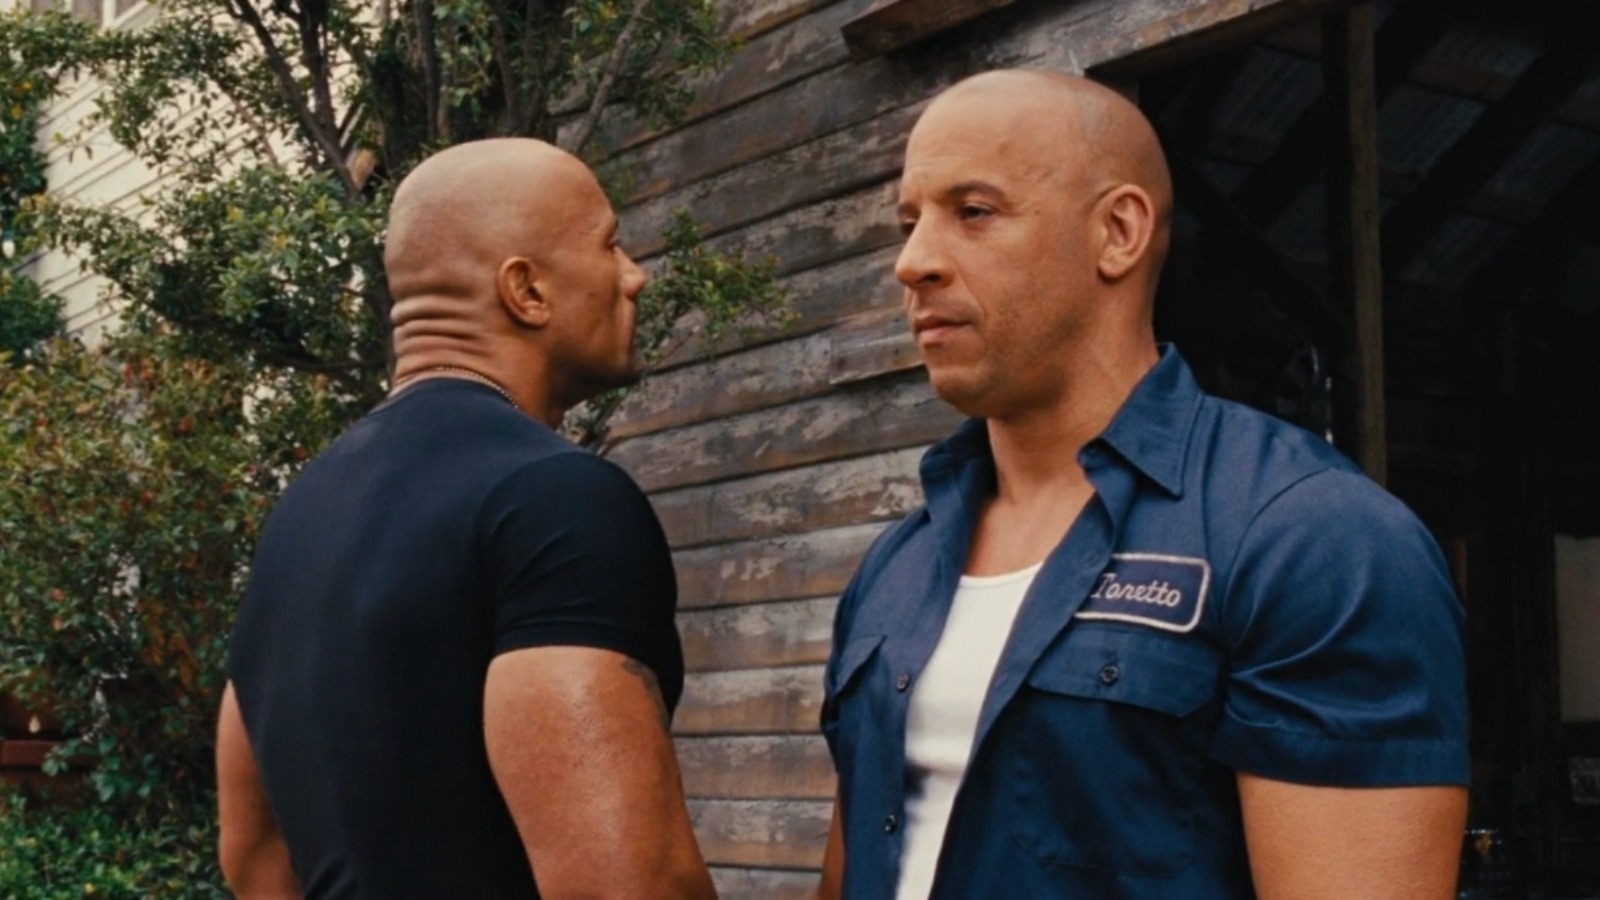 https://www.slashfilm.com/img/gallery/vin-diesel-asks-dwayne-johnson-to-return-to-fast-and-furious-in-the-weirdest-way-possible/l-intro-1636385512.jpg